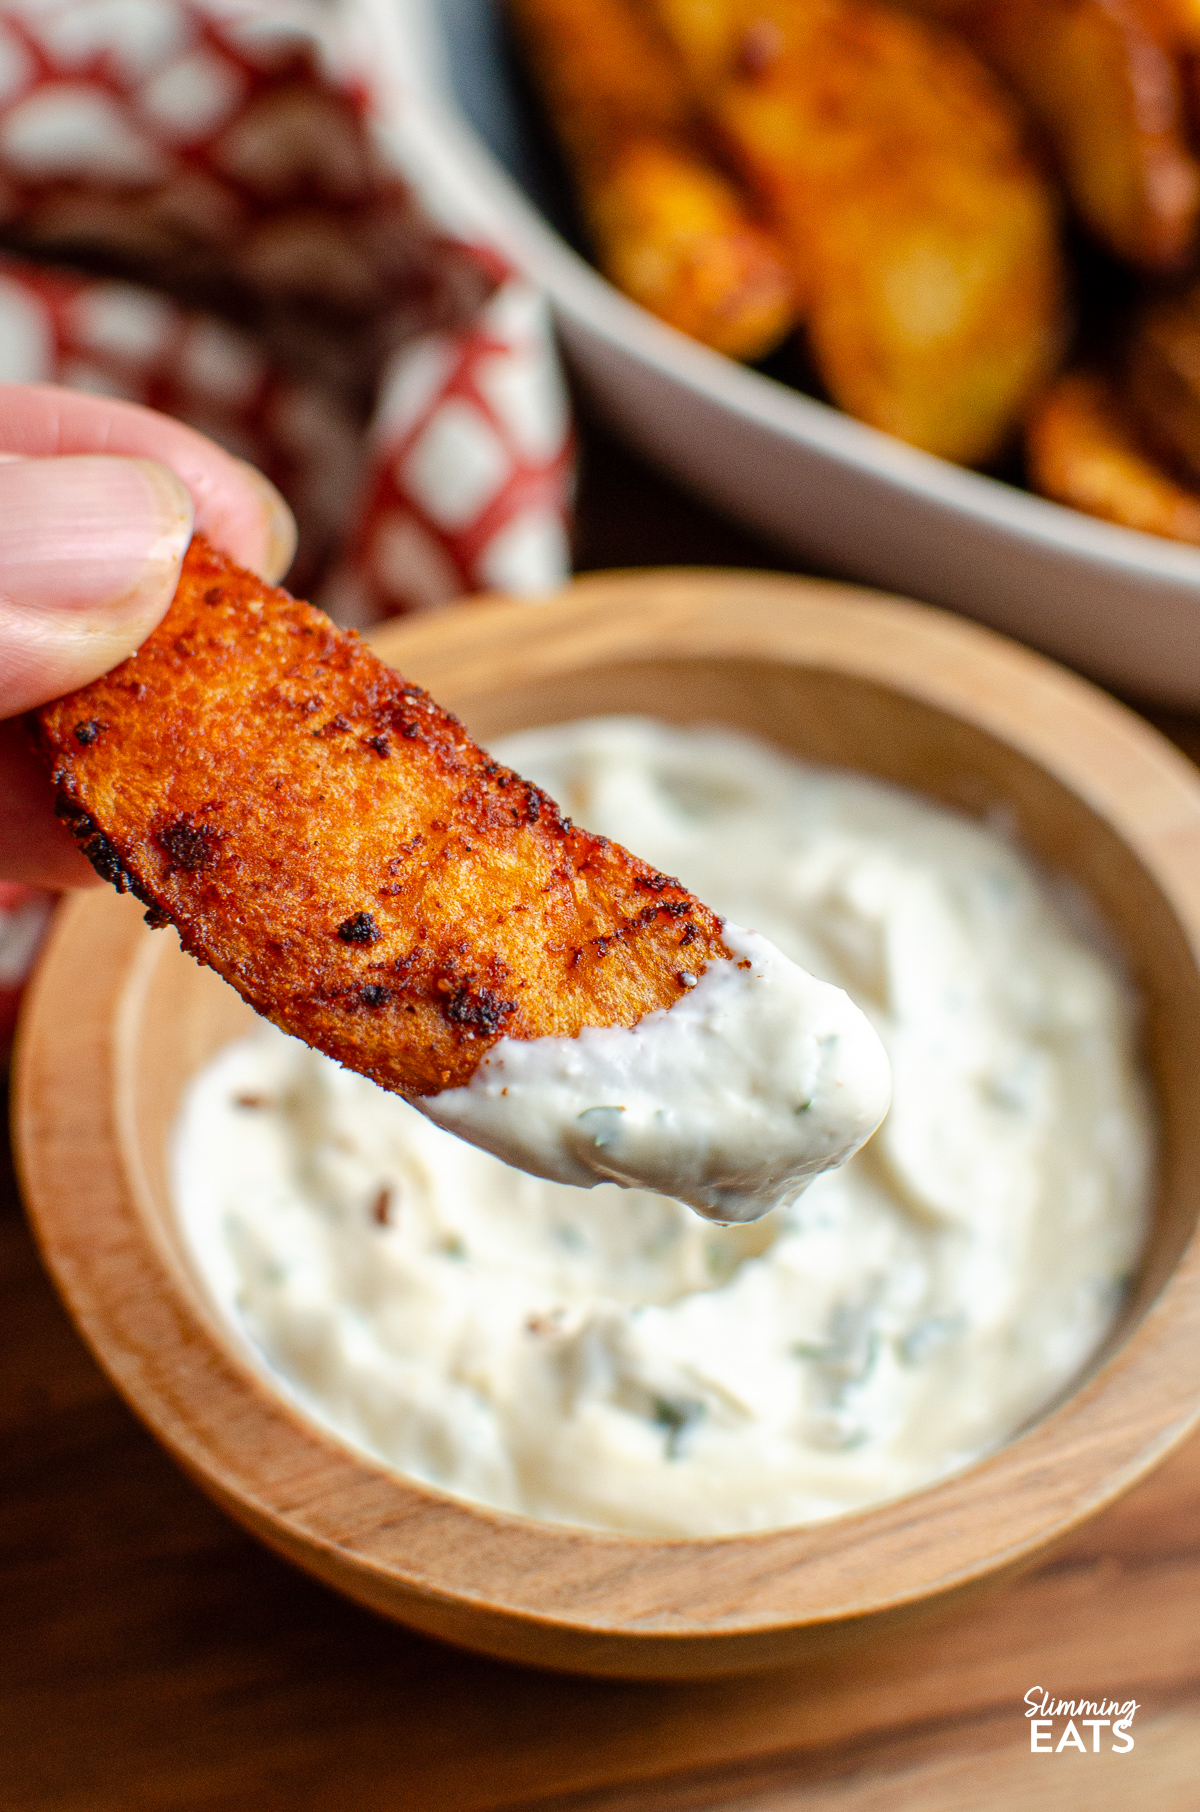 Dipping a spicy potato wedge into garlic dip in a small wooden bowl.